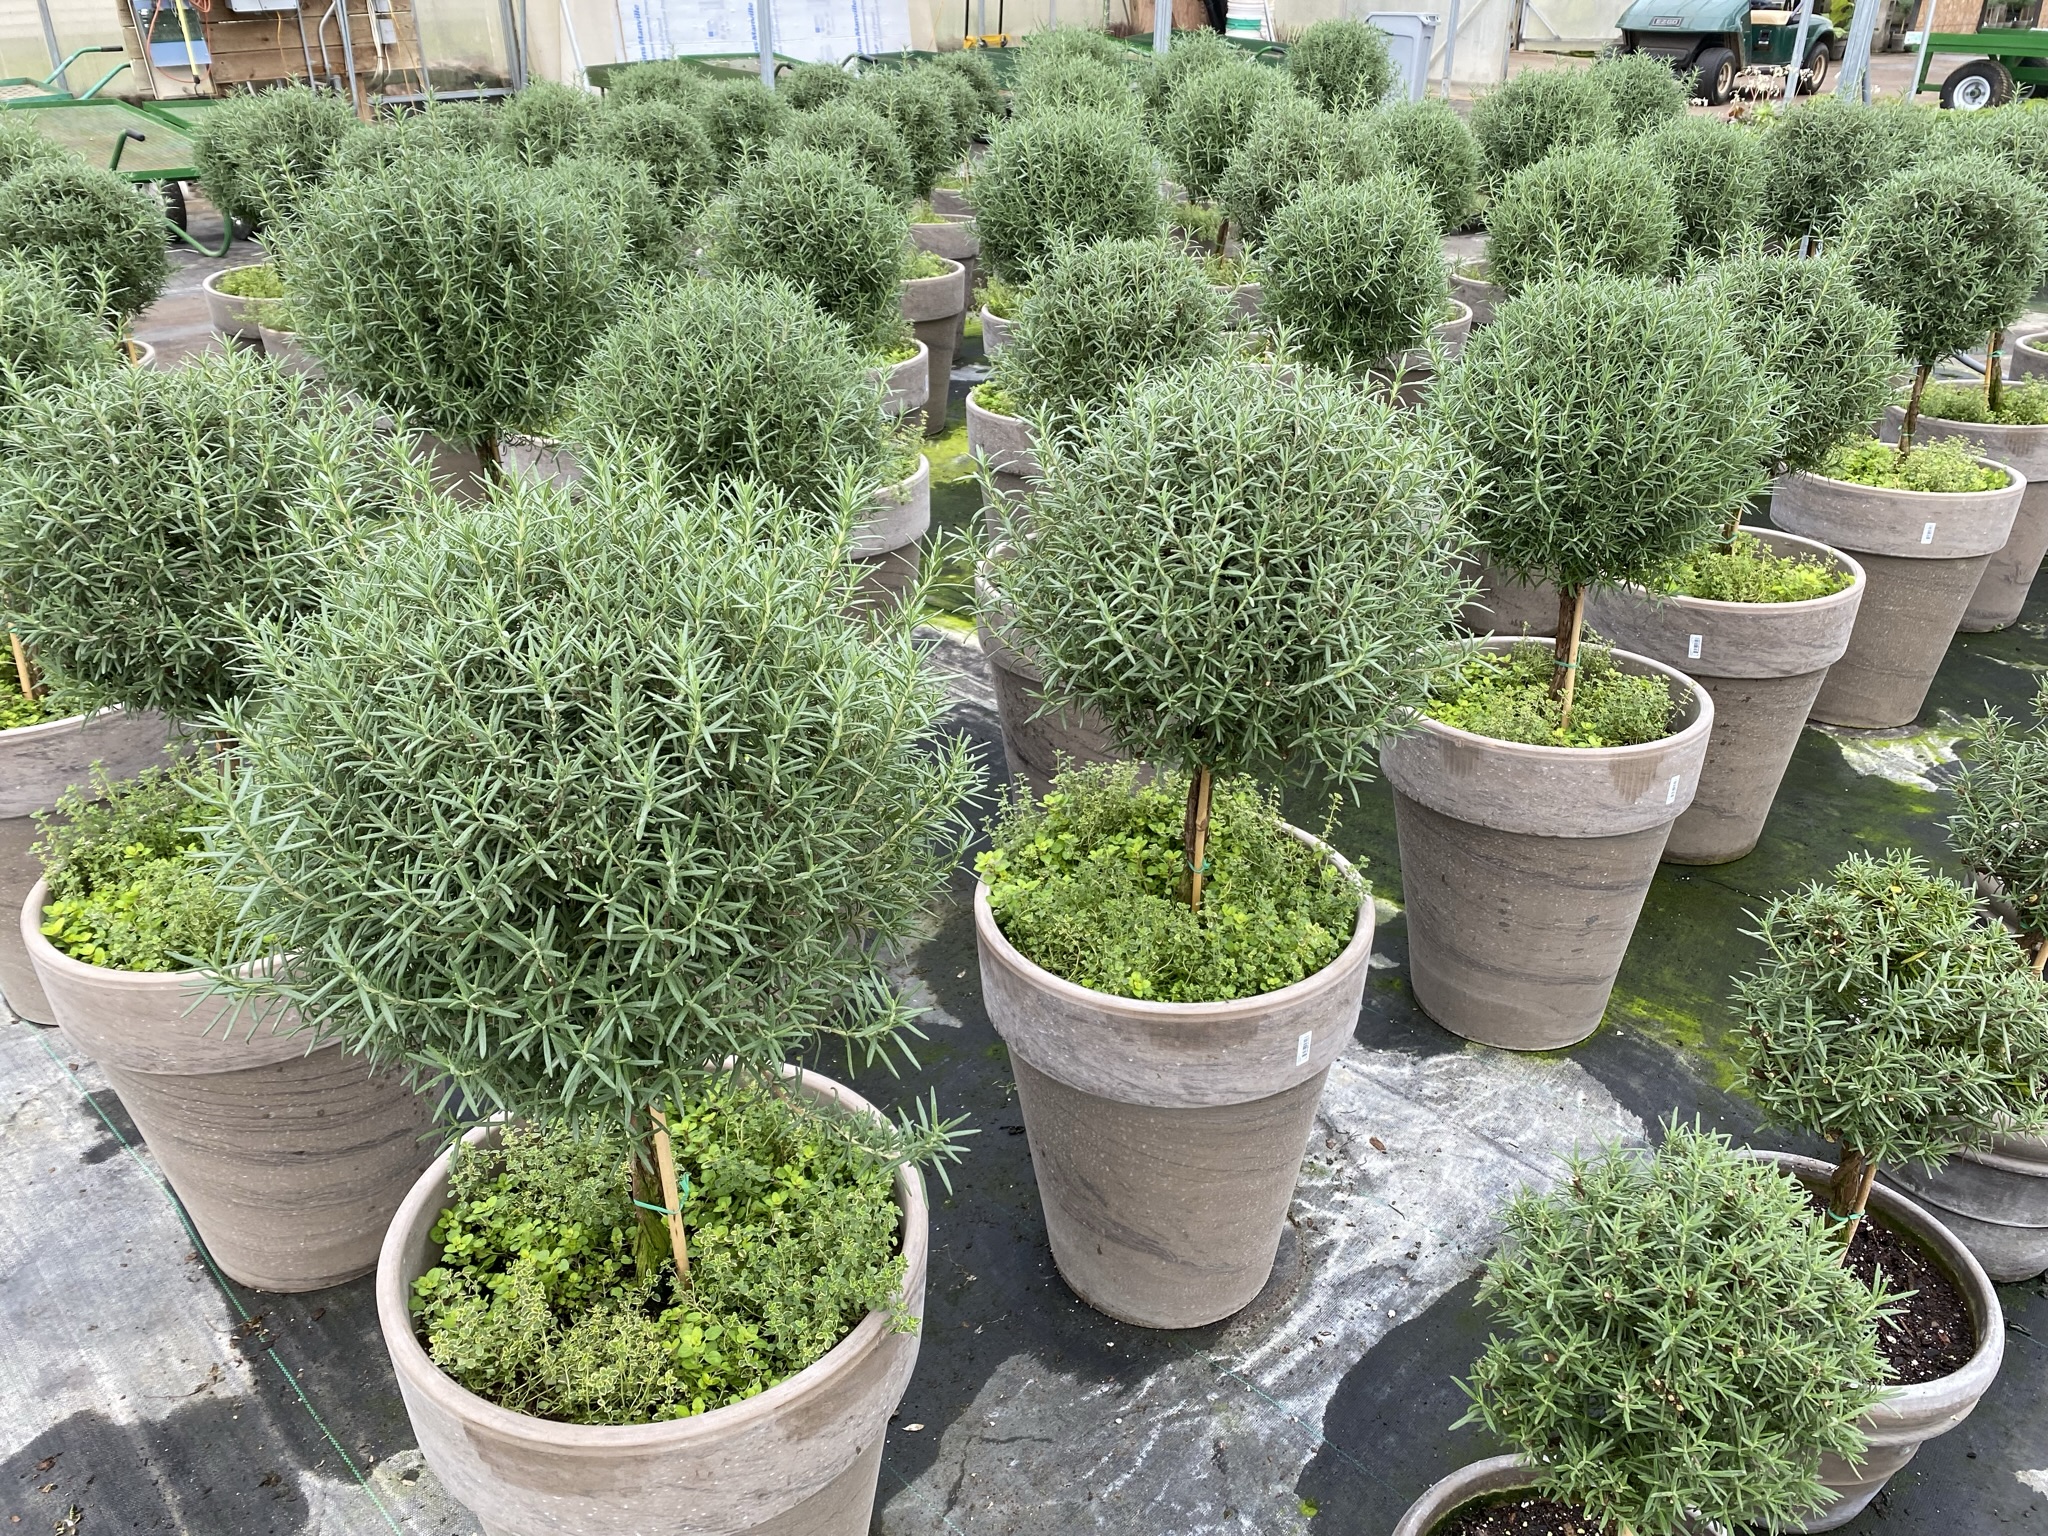 Rosemary topiaries in brown clay pots lined up on a greenhouse floor